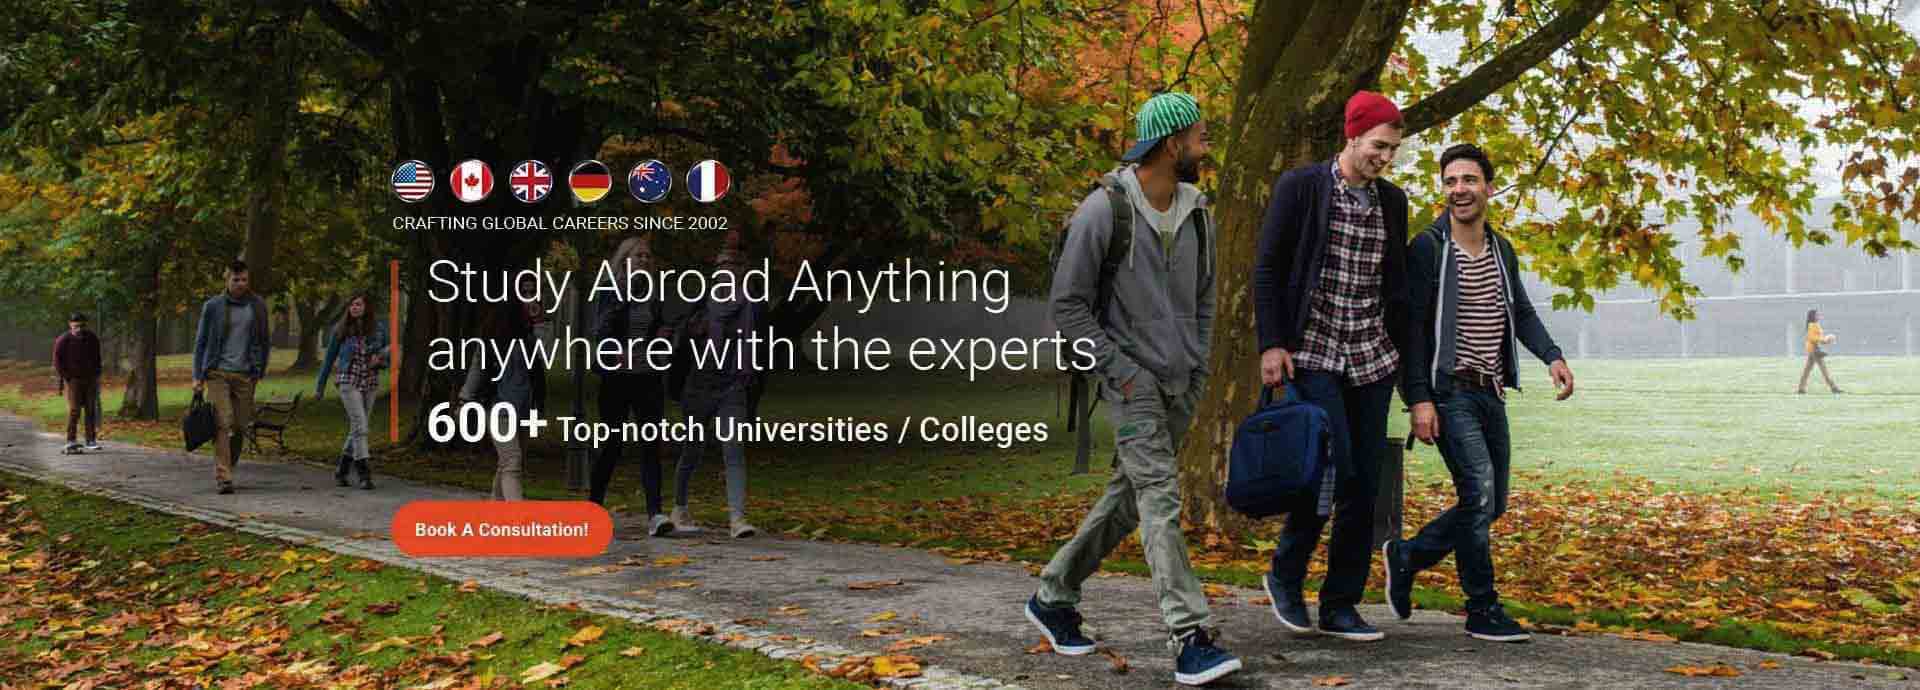 Study abroad in the country of your choice.